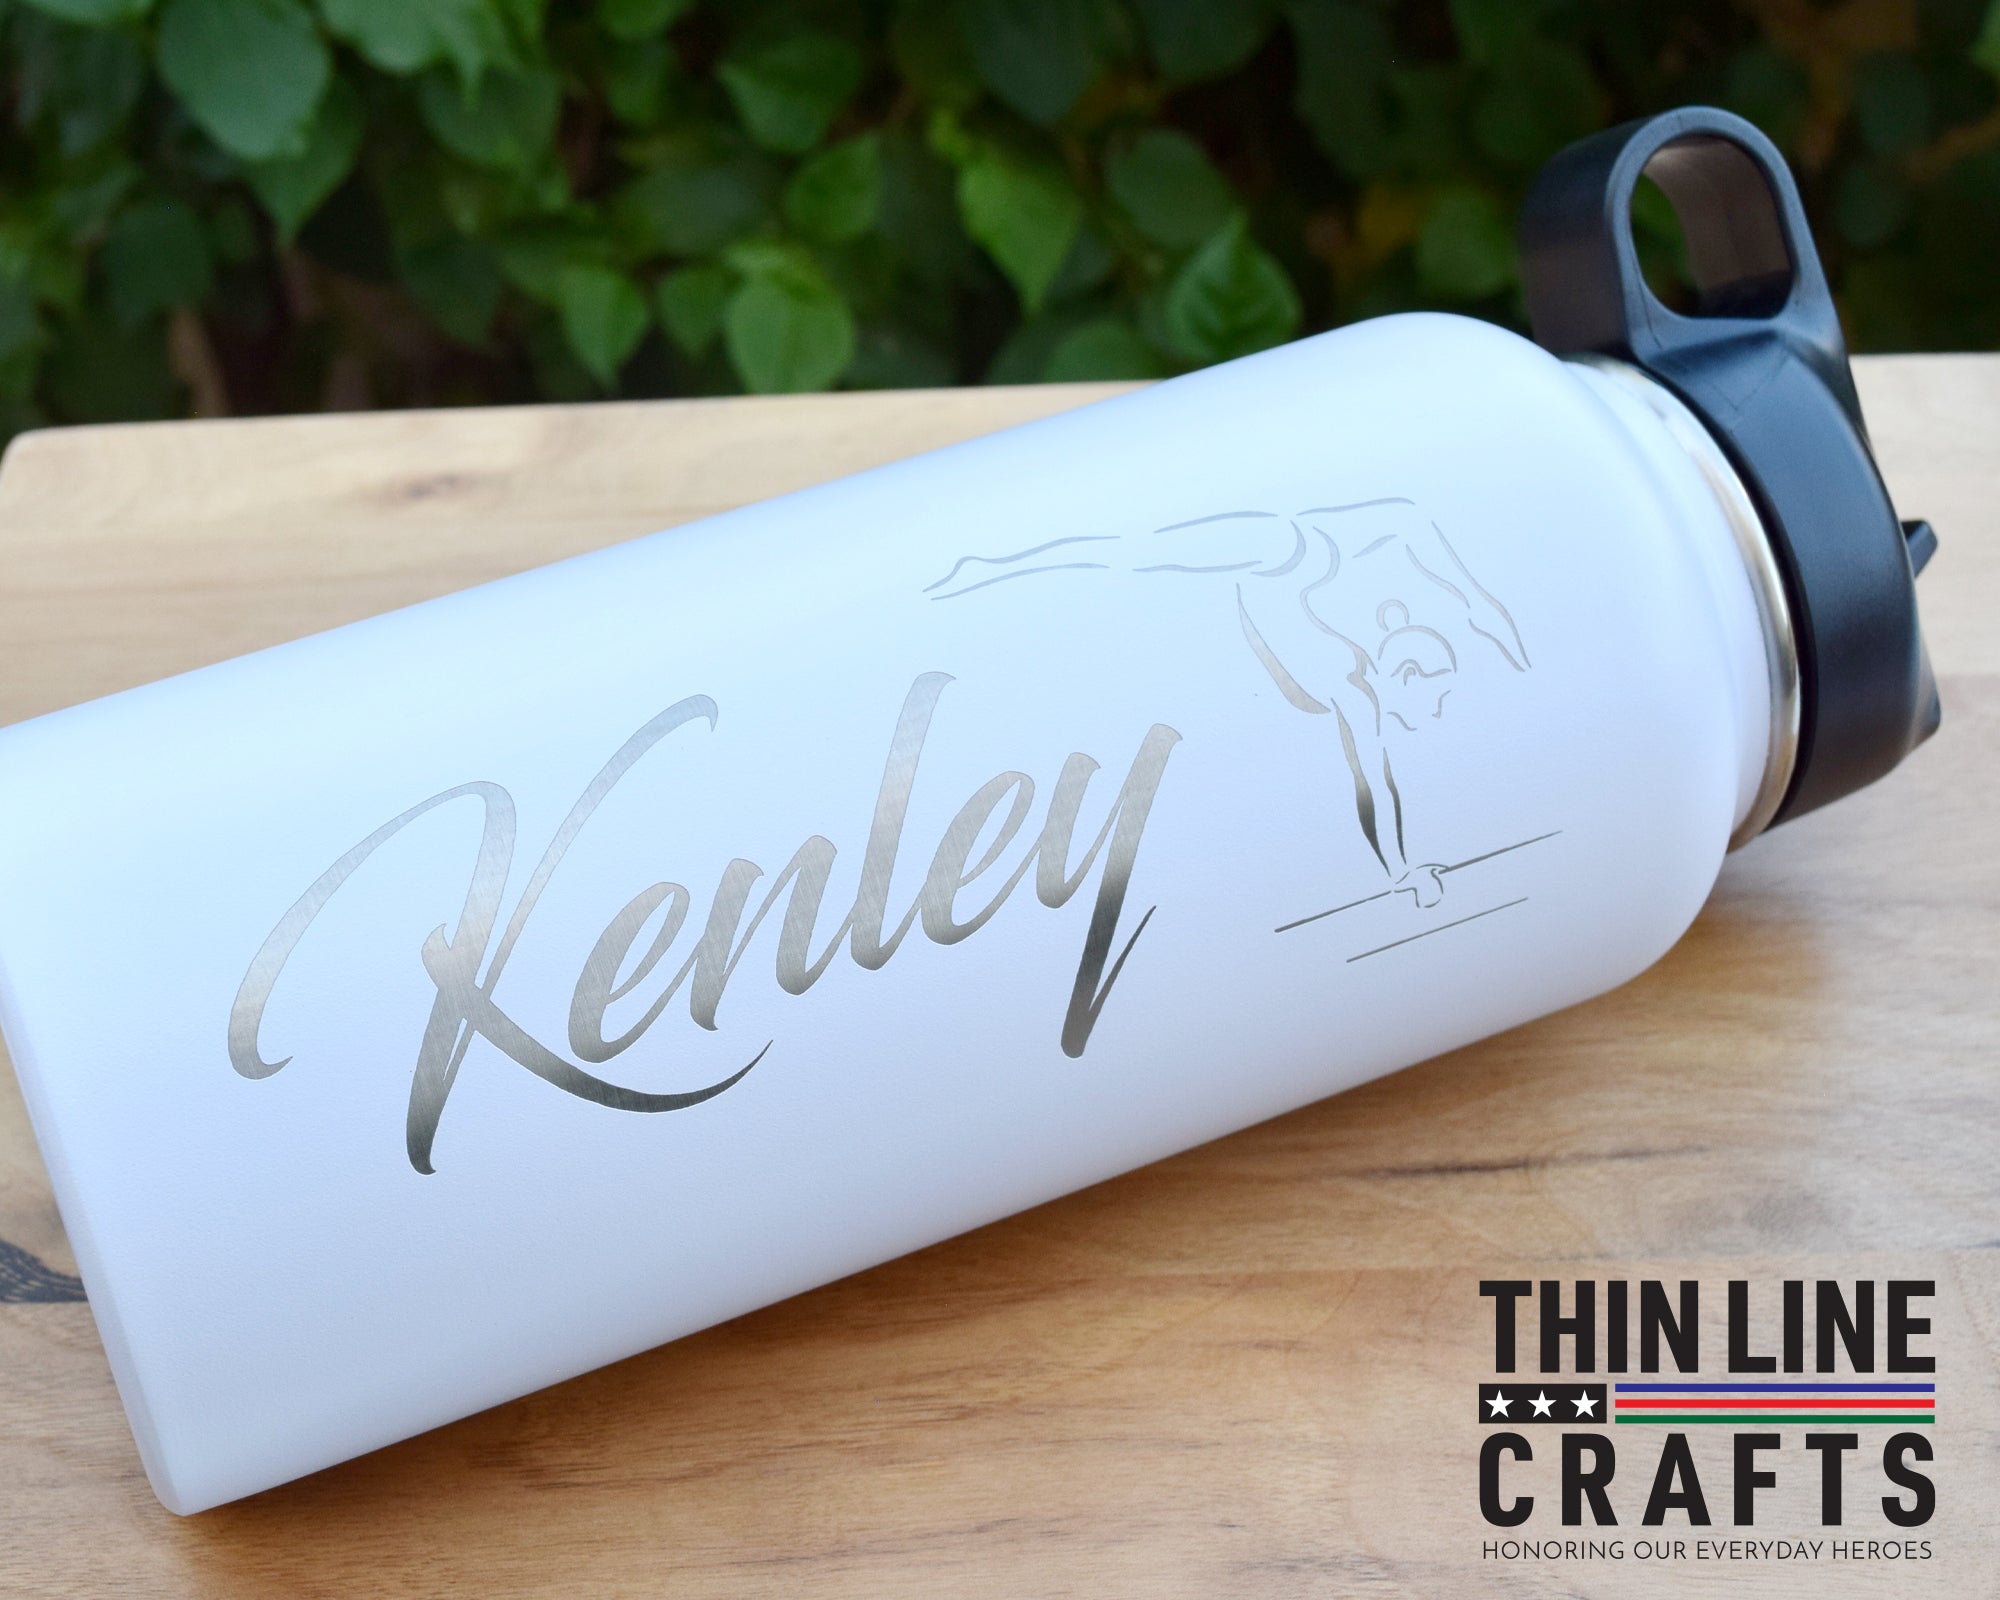 20 oz. Insulated Water Bottle - King Engraving - Personalized